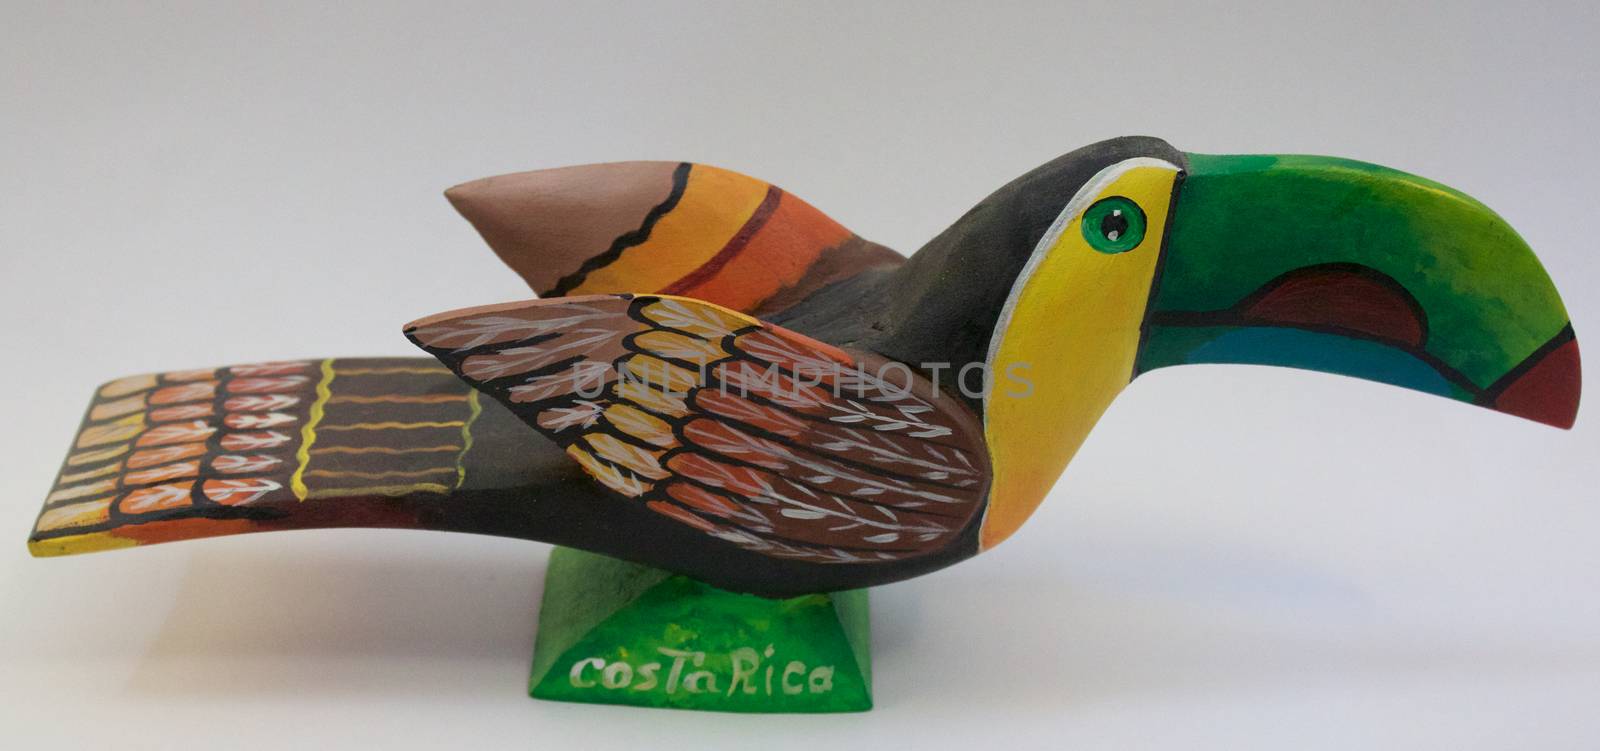 Wooden Artwork from Costa Rica of a Toucan by jhlemmer